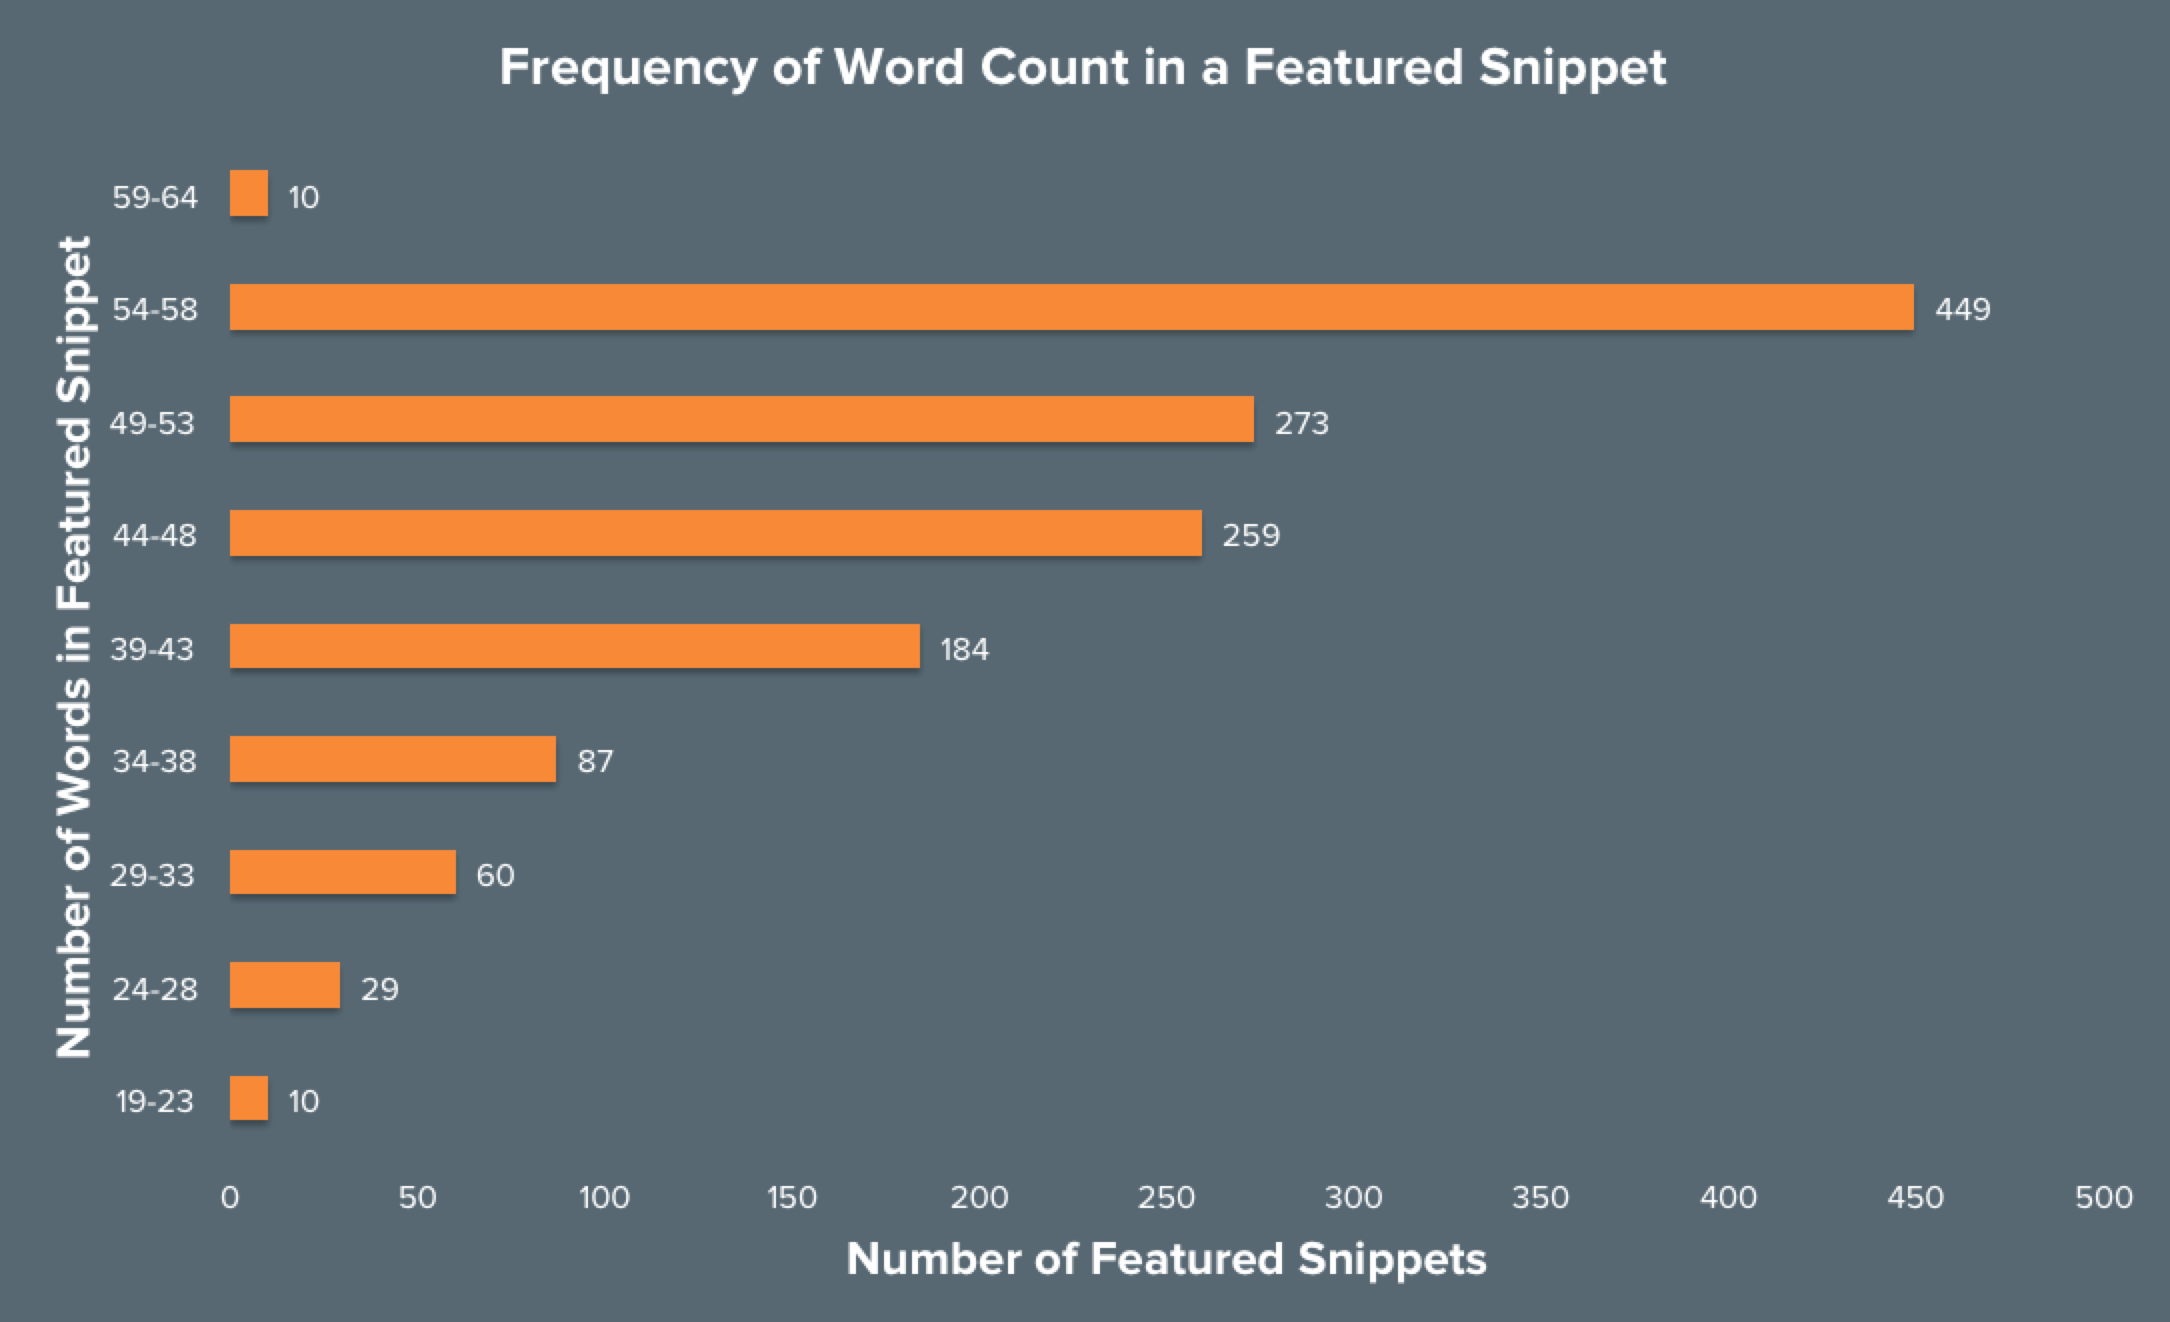 Chart: Frequency of Featured Snippet Word Count